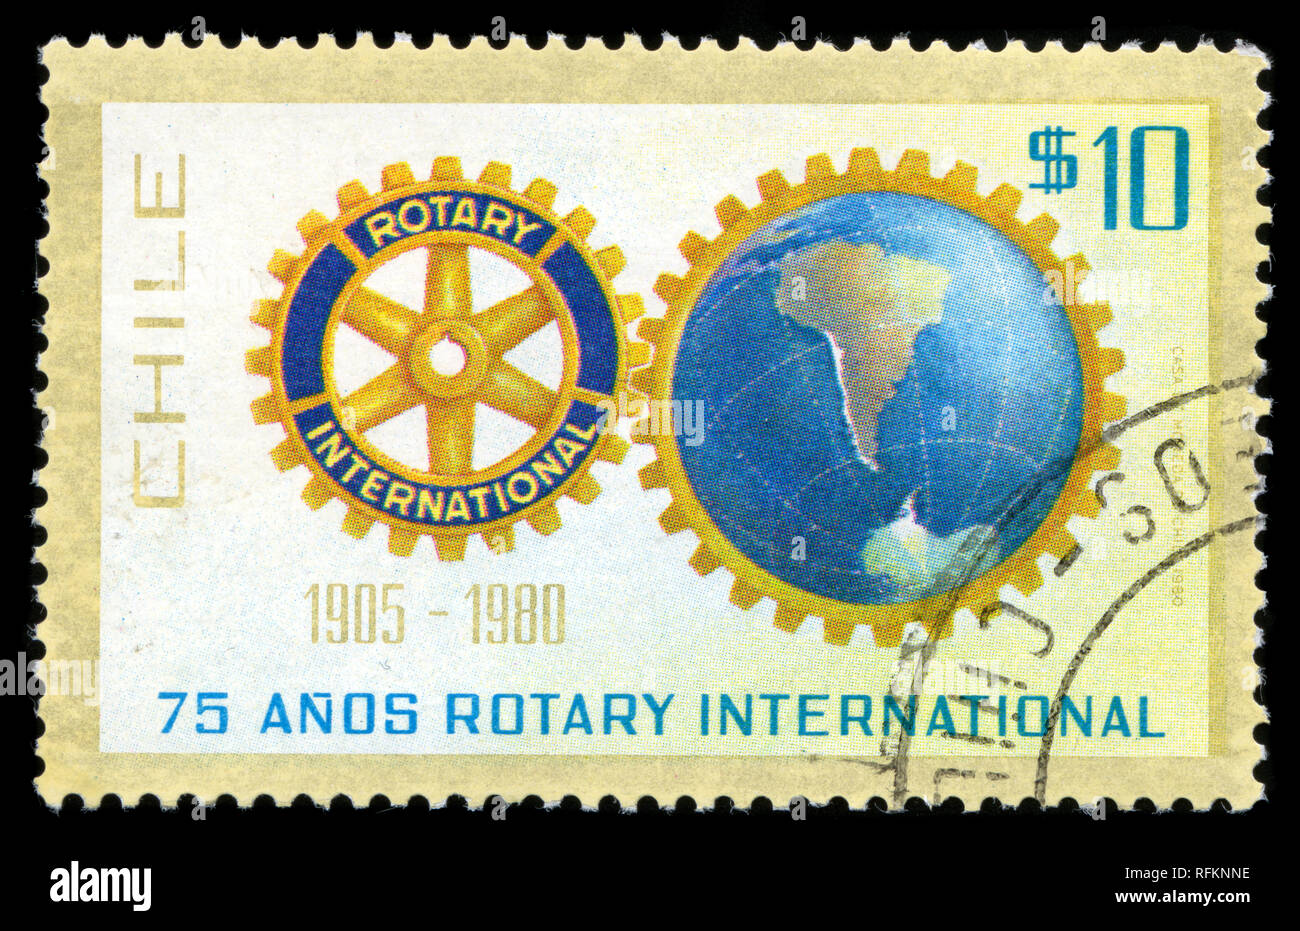 Postage stamp from Chile in the Rotary International, 75th Anniversary series issued in 1980 Stock Photo